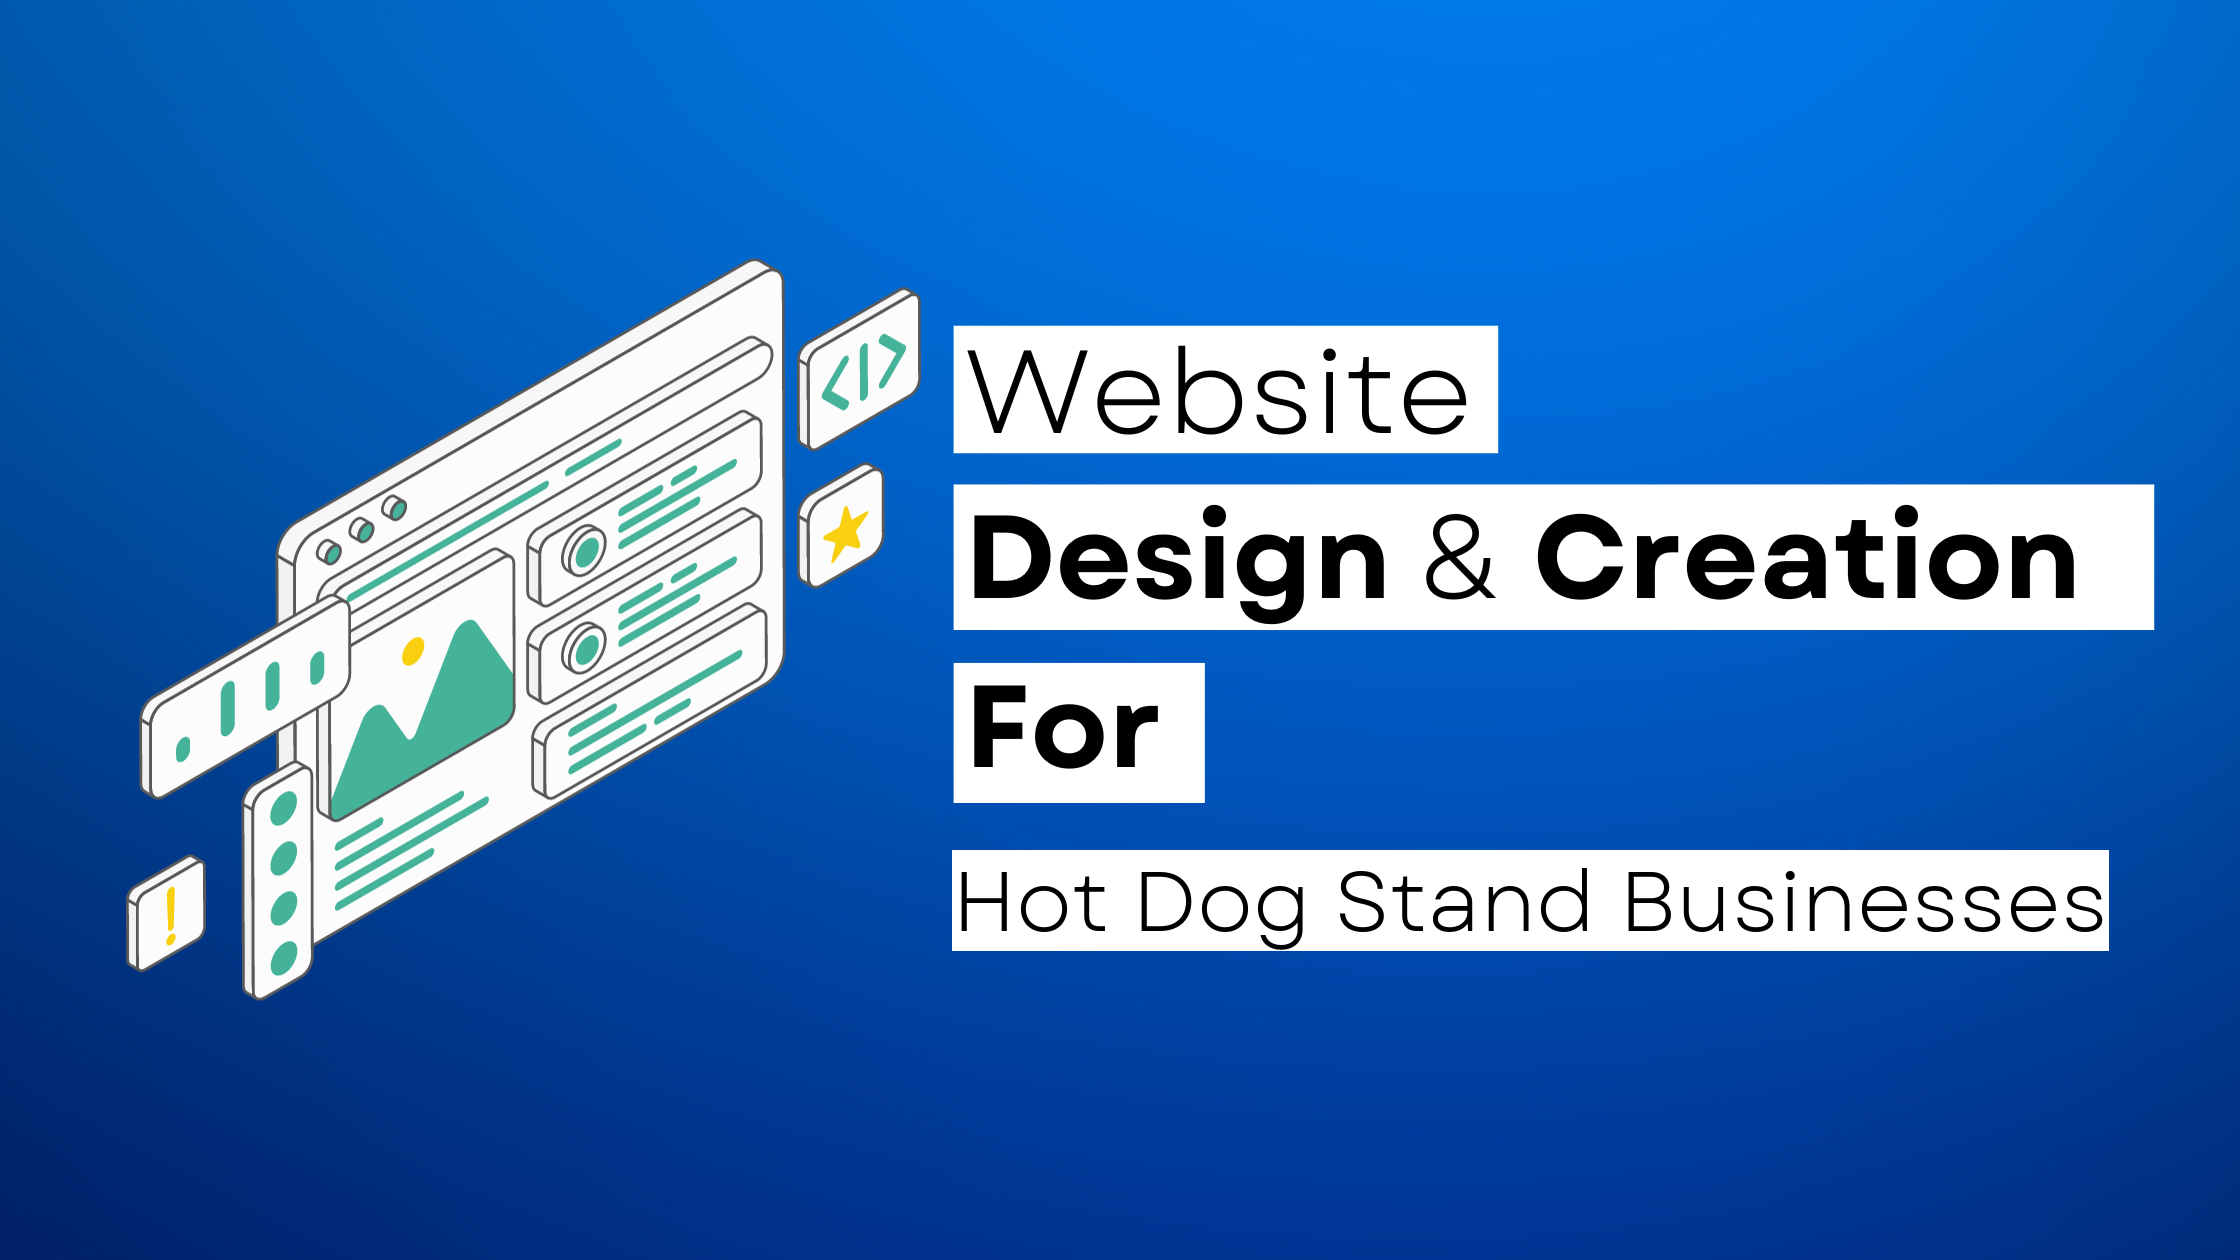 How to start a Hot Dog Stand website